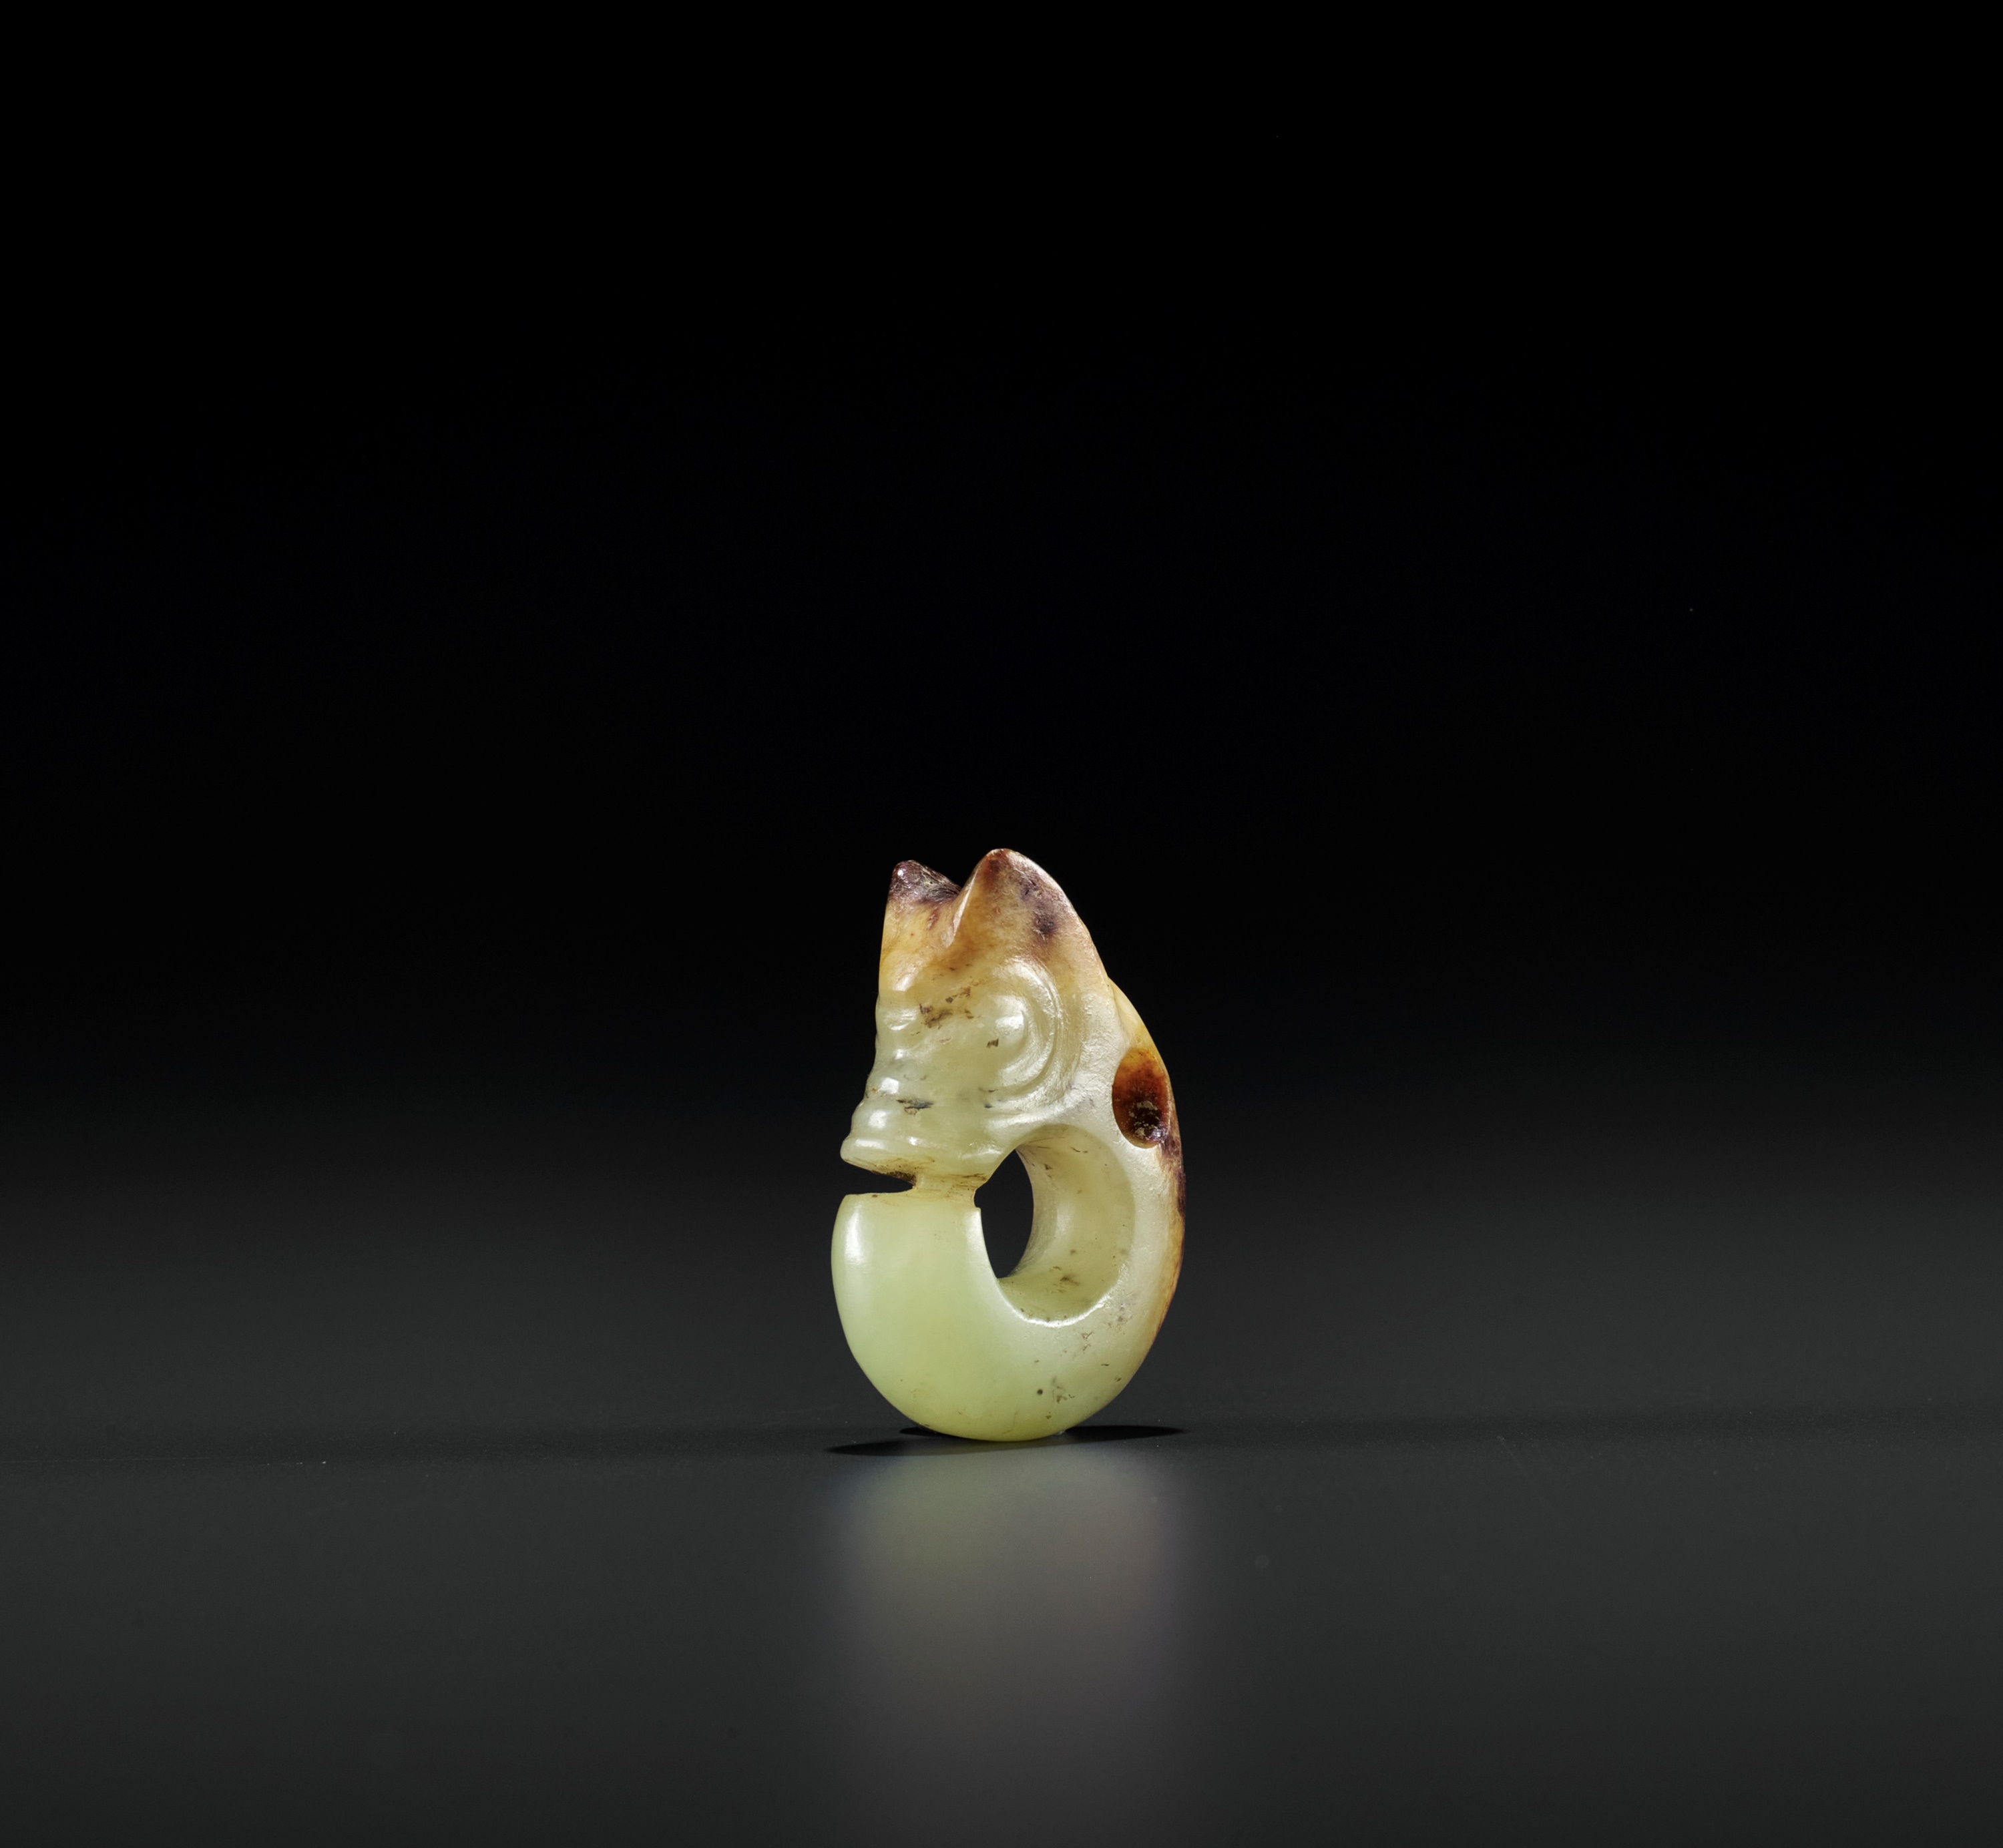 A YELLOW AND RUSSET MINIATURE 'PIG DRAGON' PENDANT, ZHULONG, MING DYNASTY